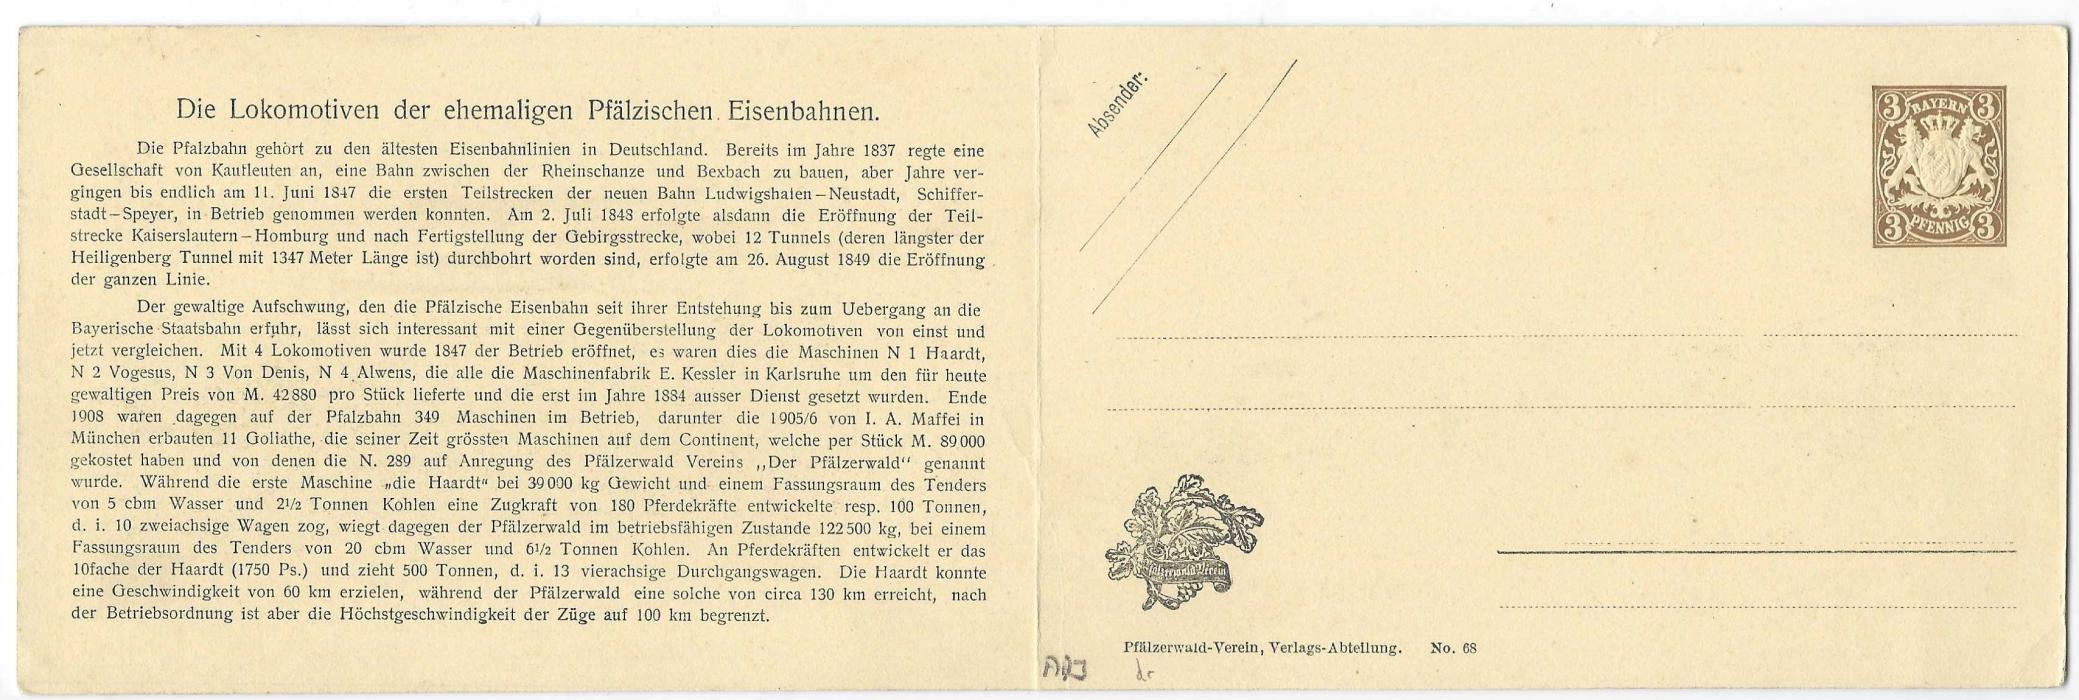 Germany (Bavaria Picture Stationery) 1910s 3pf double stationery card bearing images of two Trains, the reverse of one with text entitled (translated) “The Locomotives of the former Palatinate Railways”; fine unused.